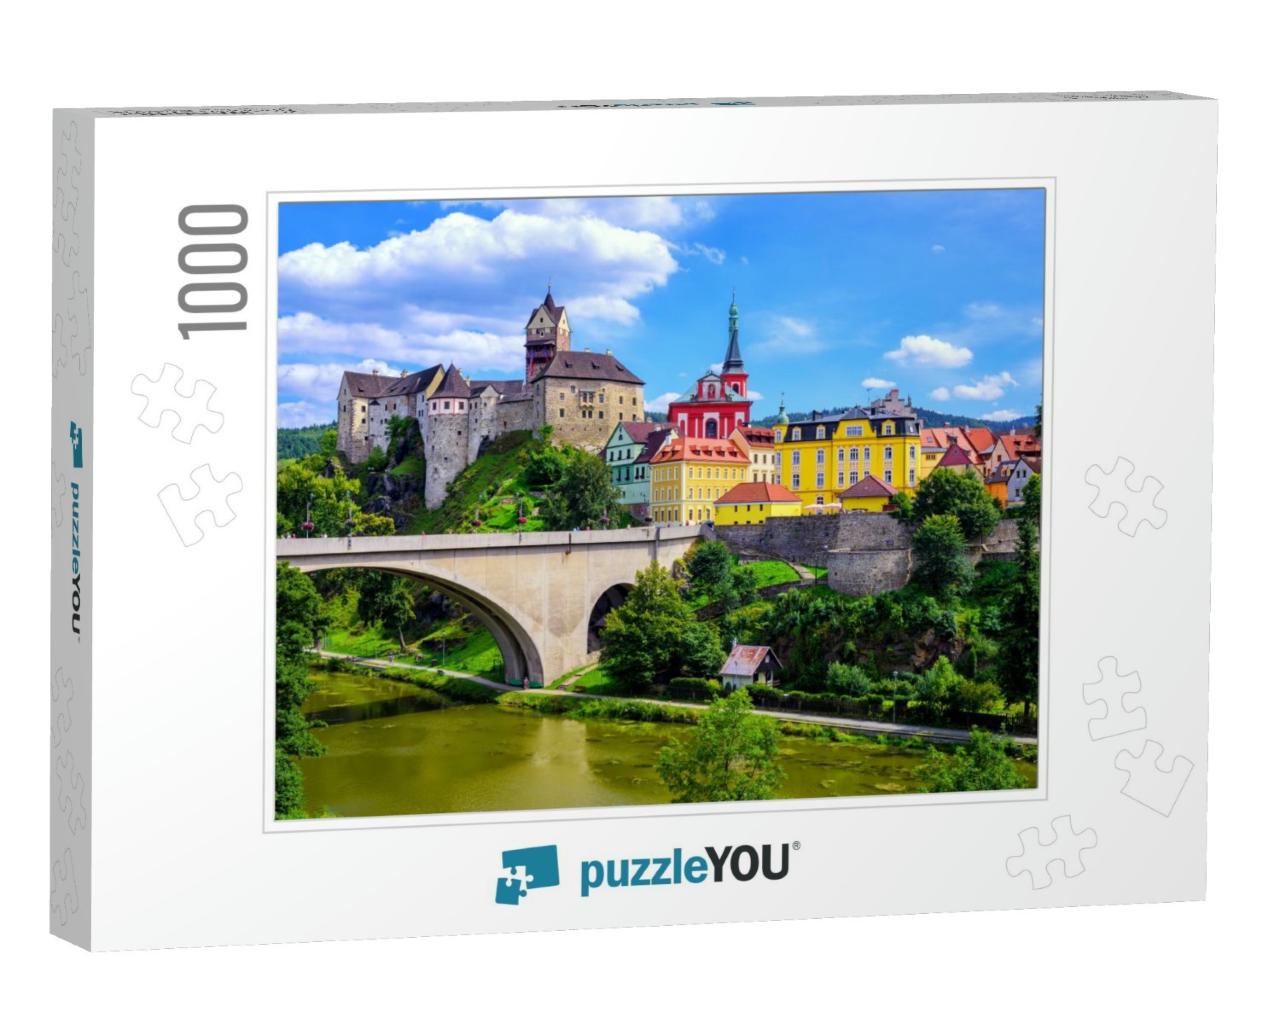 Colorful Town & Castle Loket Over Eger River in the Near... Jigsaw Puzzle with 1000 pieces